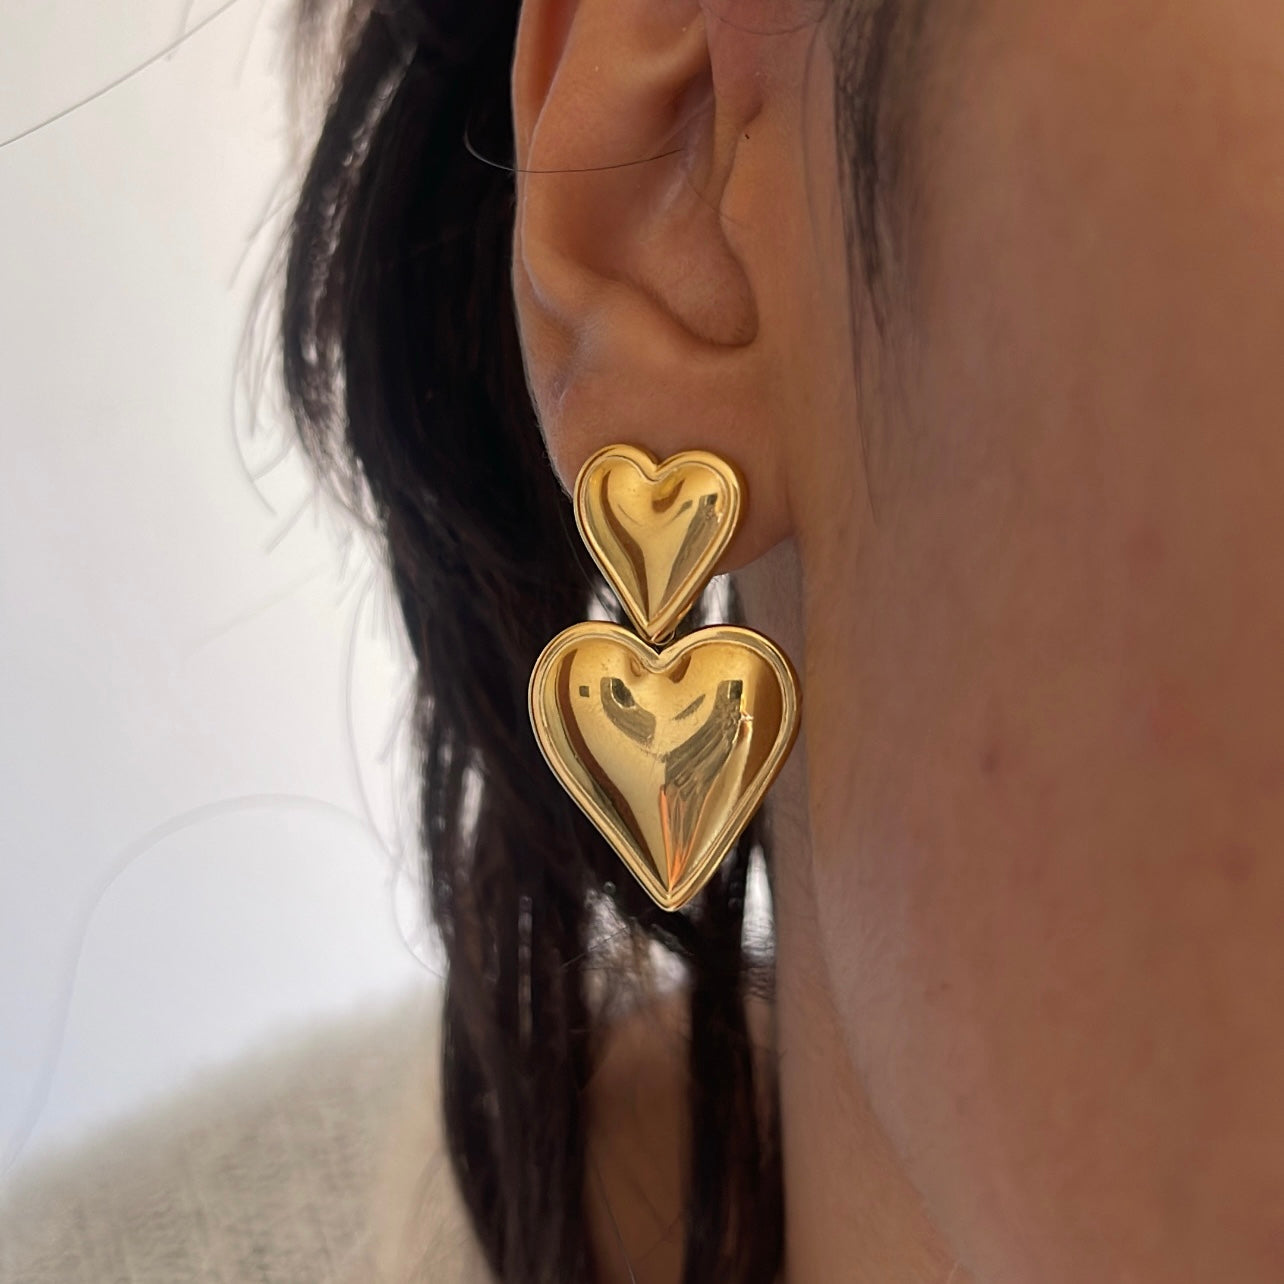 Chubby heart | Gold-plated heart earrings - Ladywithcraft